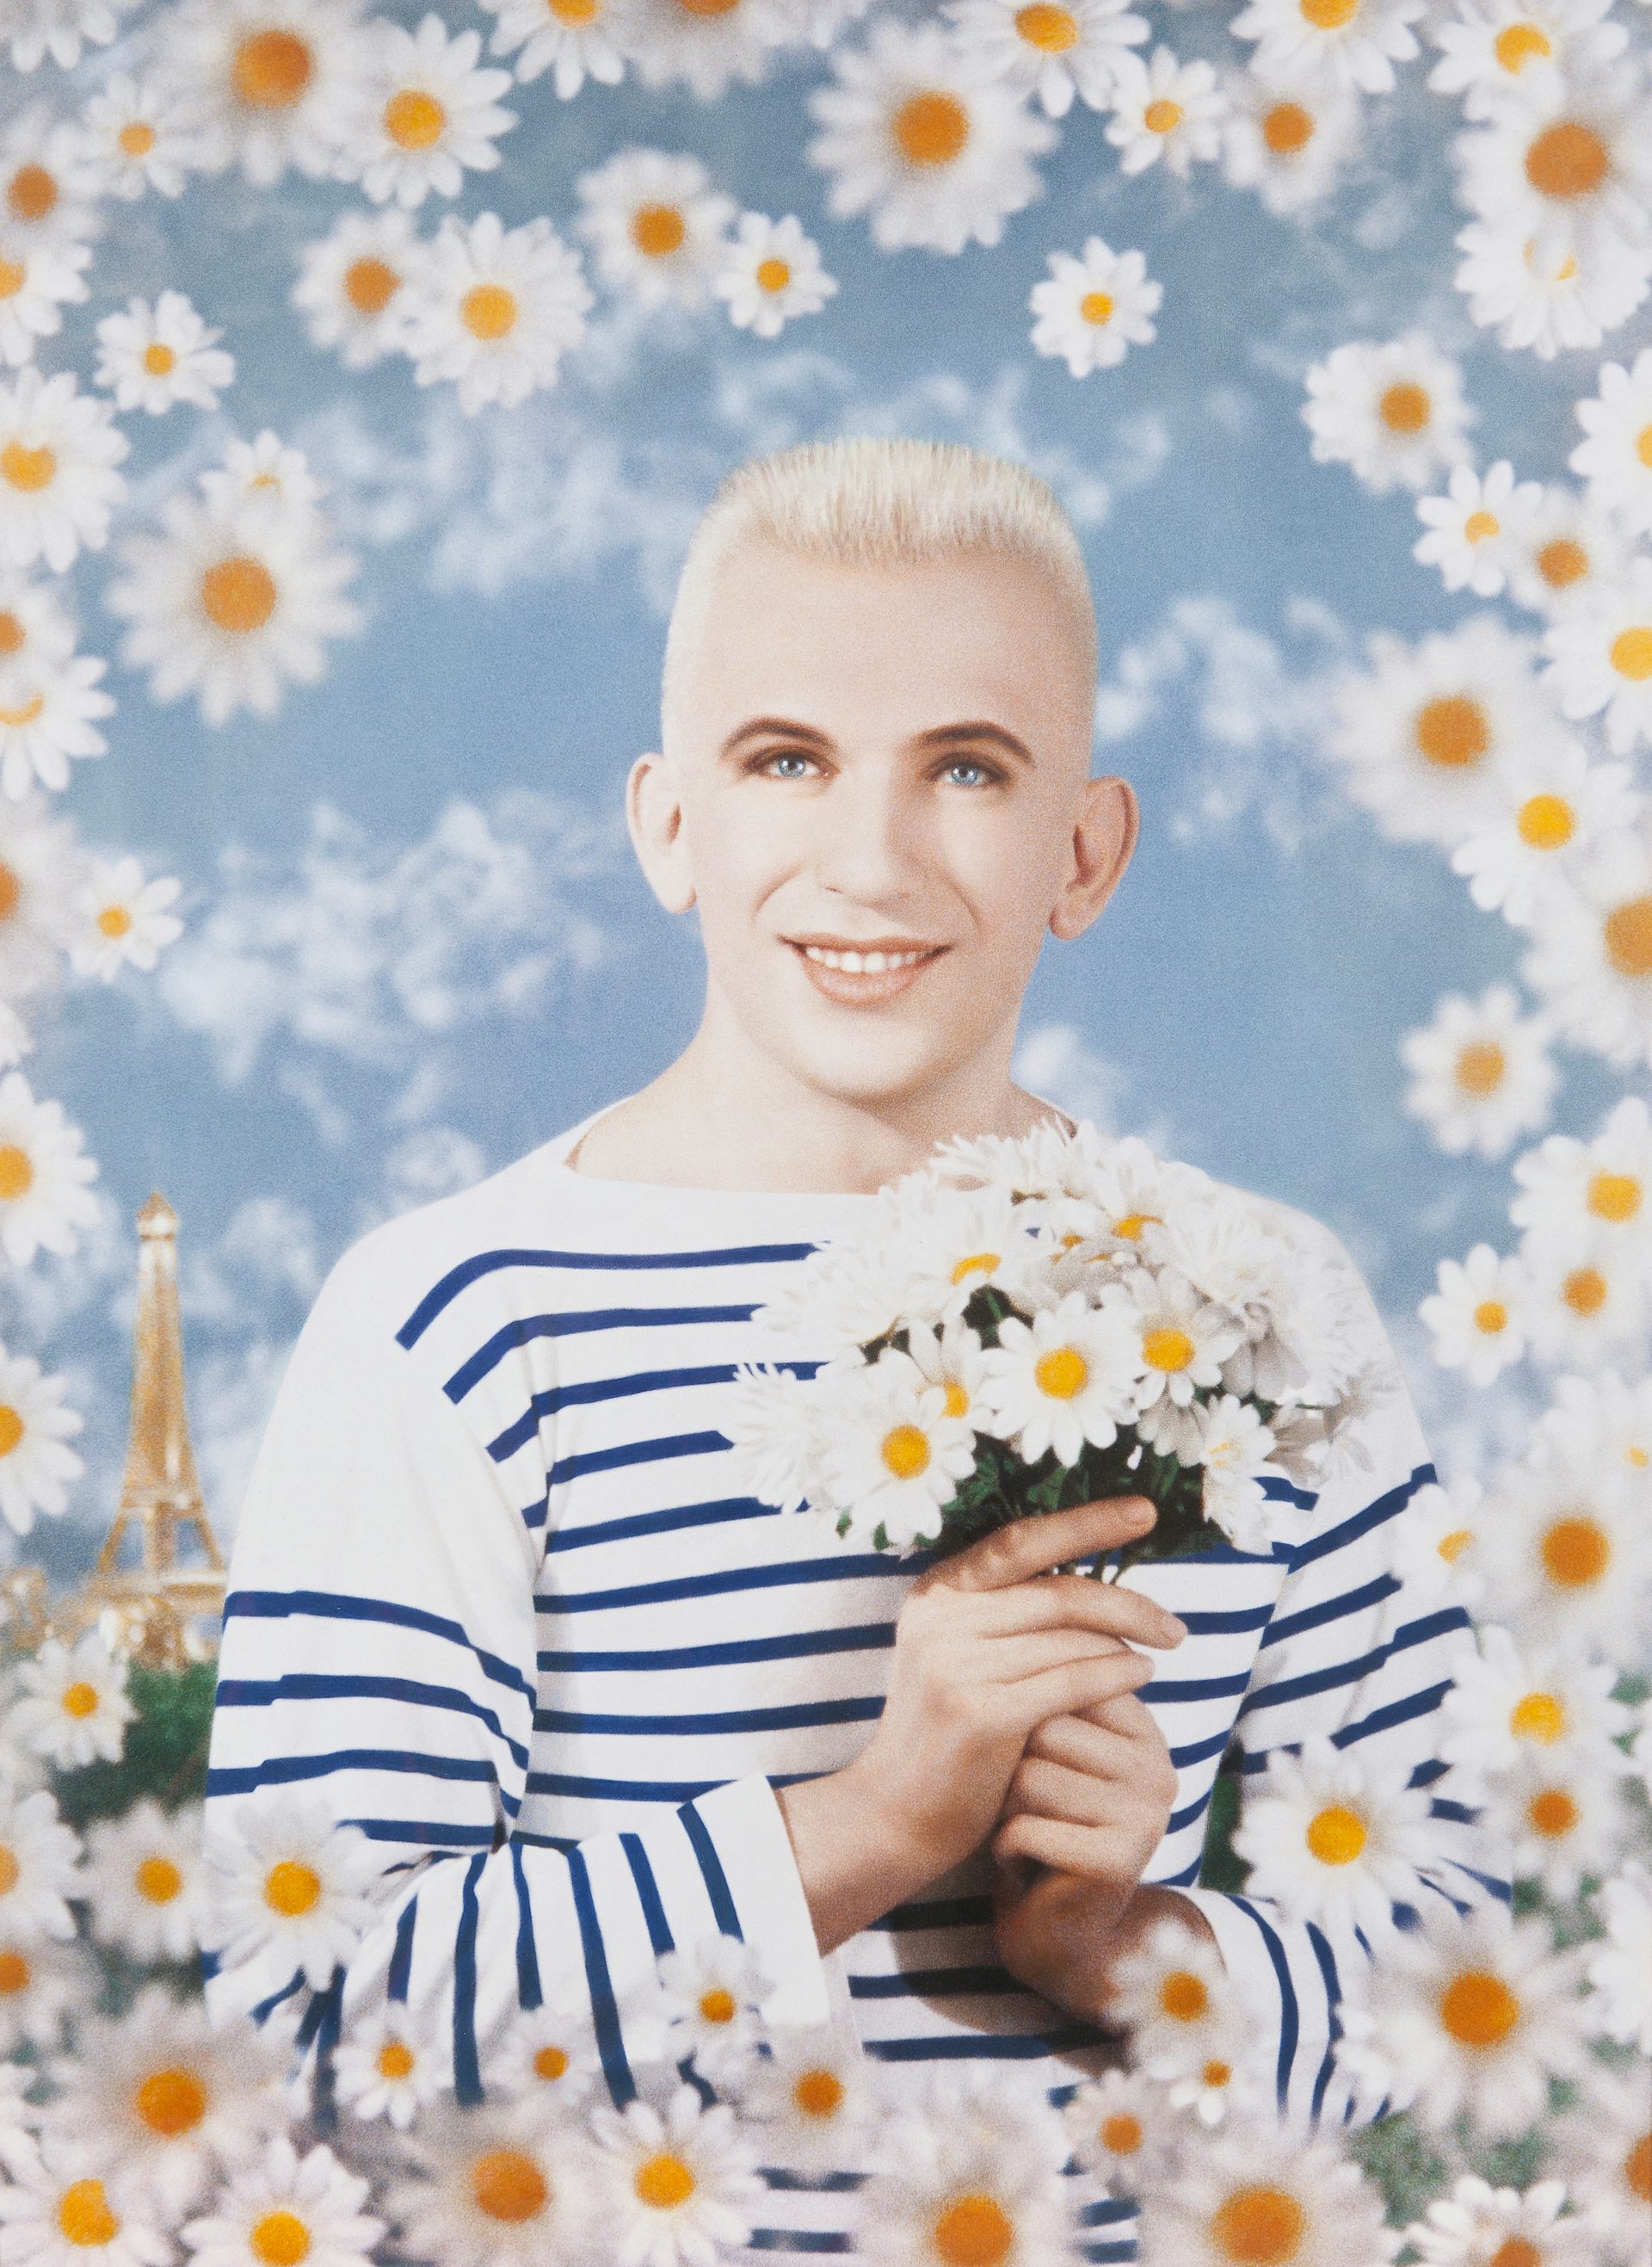 Jean Paul Gaultier and the true history of the fashion stripe